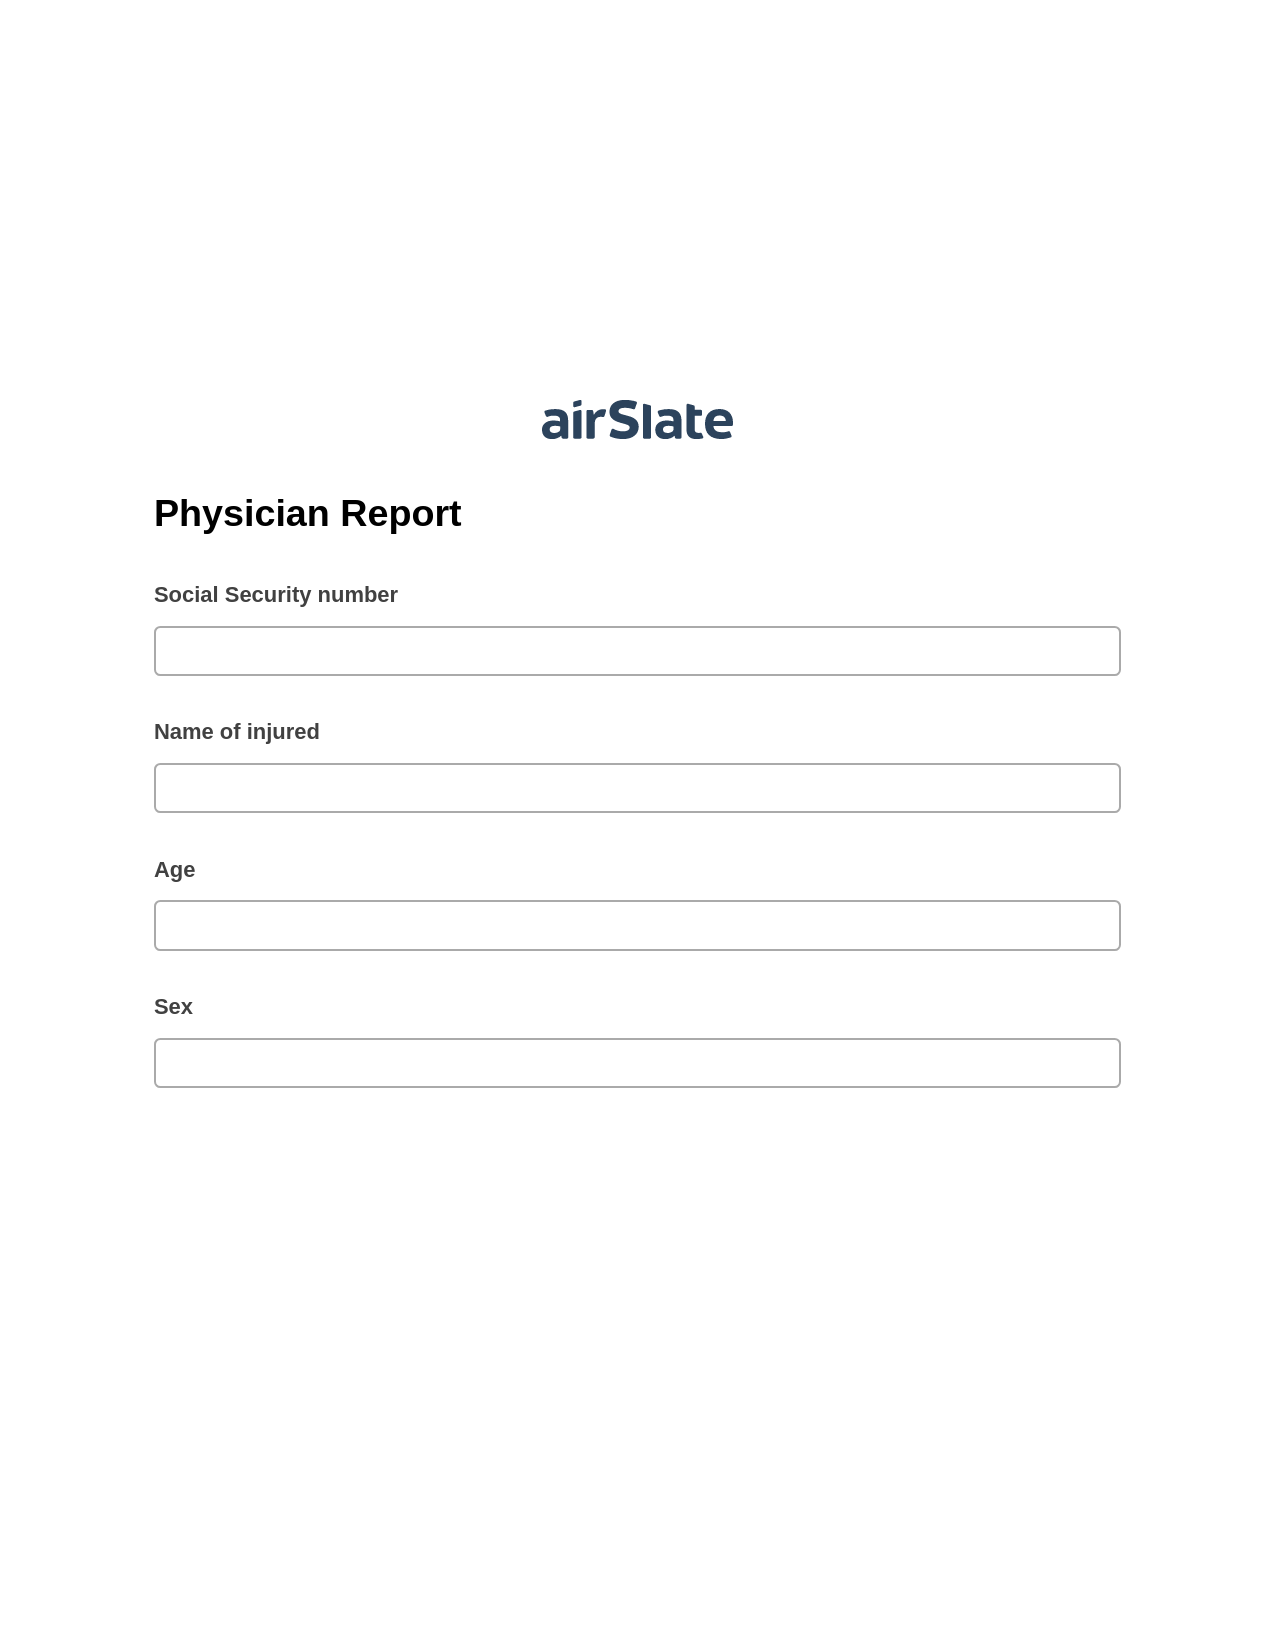 Multirole Physician Report Pre-fill from CSV File Bot, Invoke Salesforce Process Bot, Export to NetSuite Bot